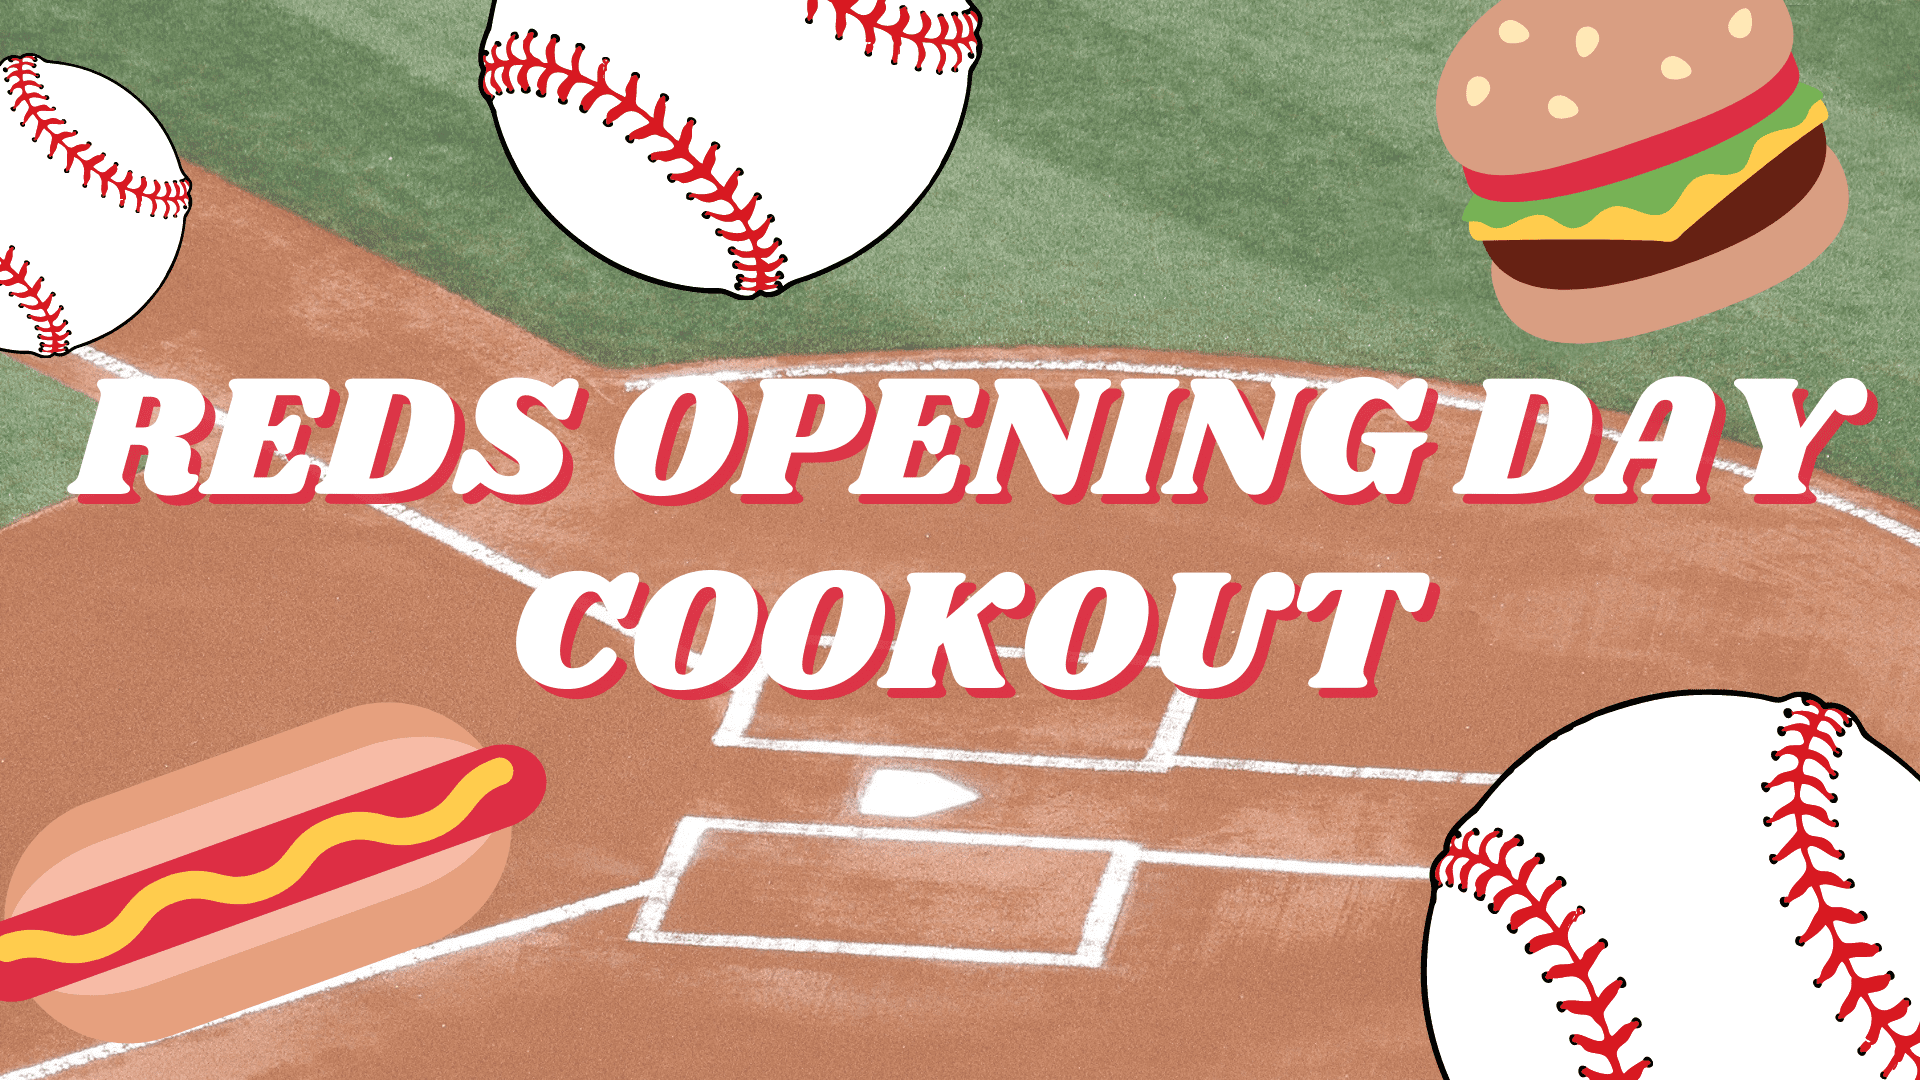 The Ashford of Mt. Washington - Reds Opening Day Cookout